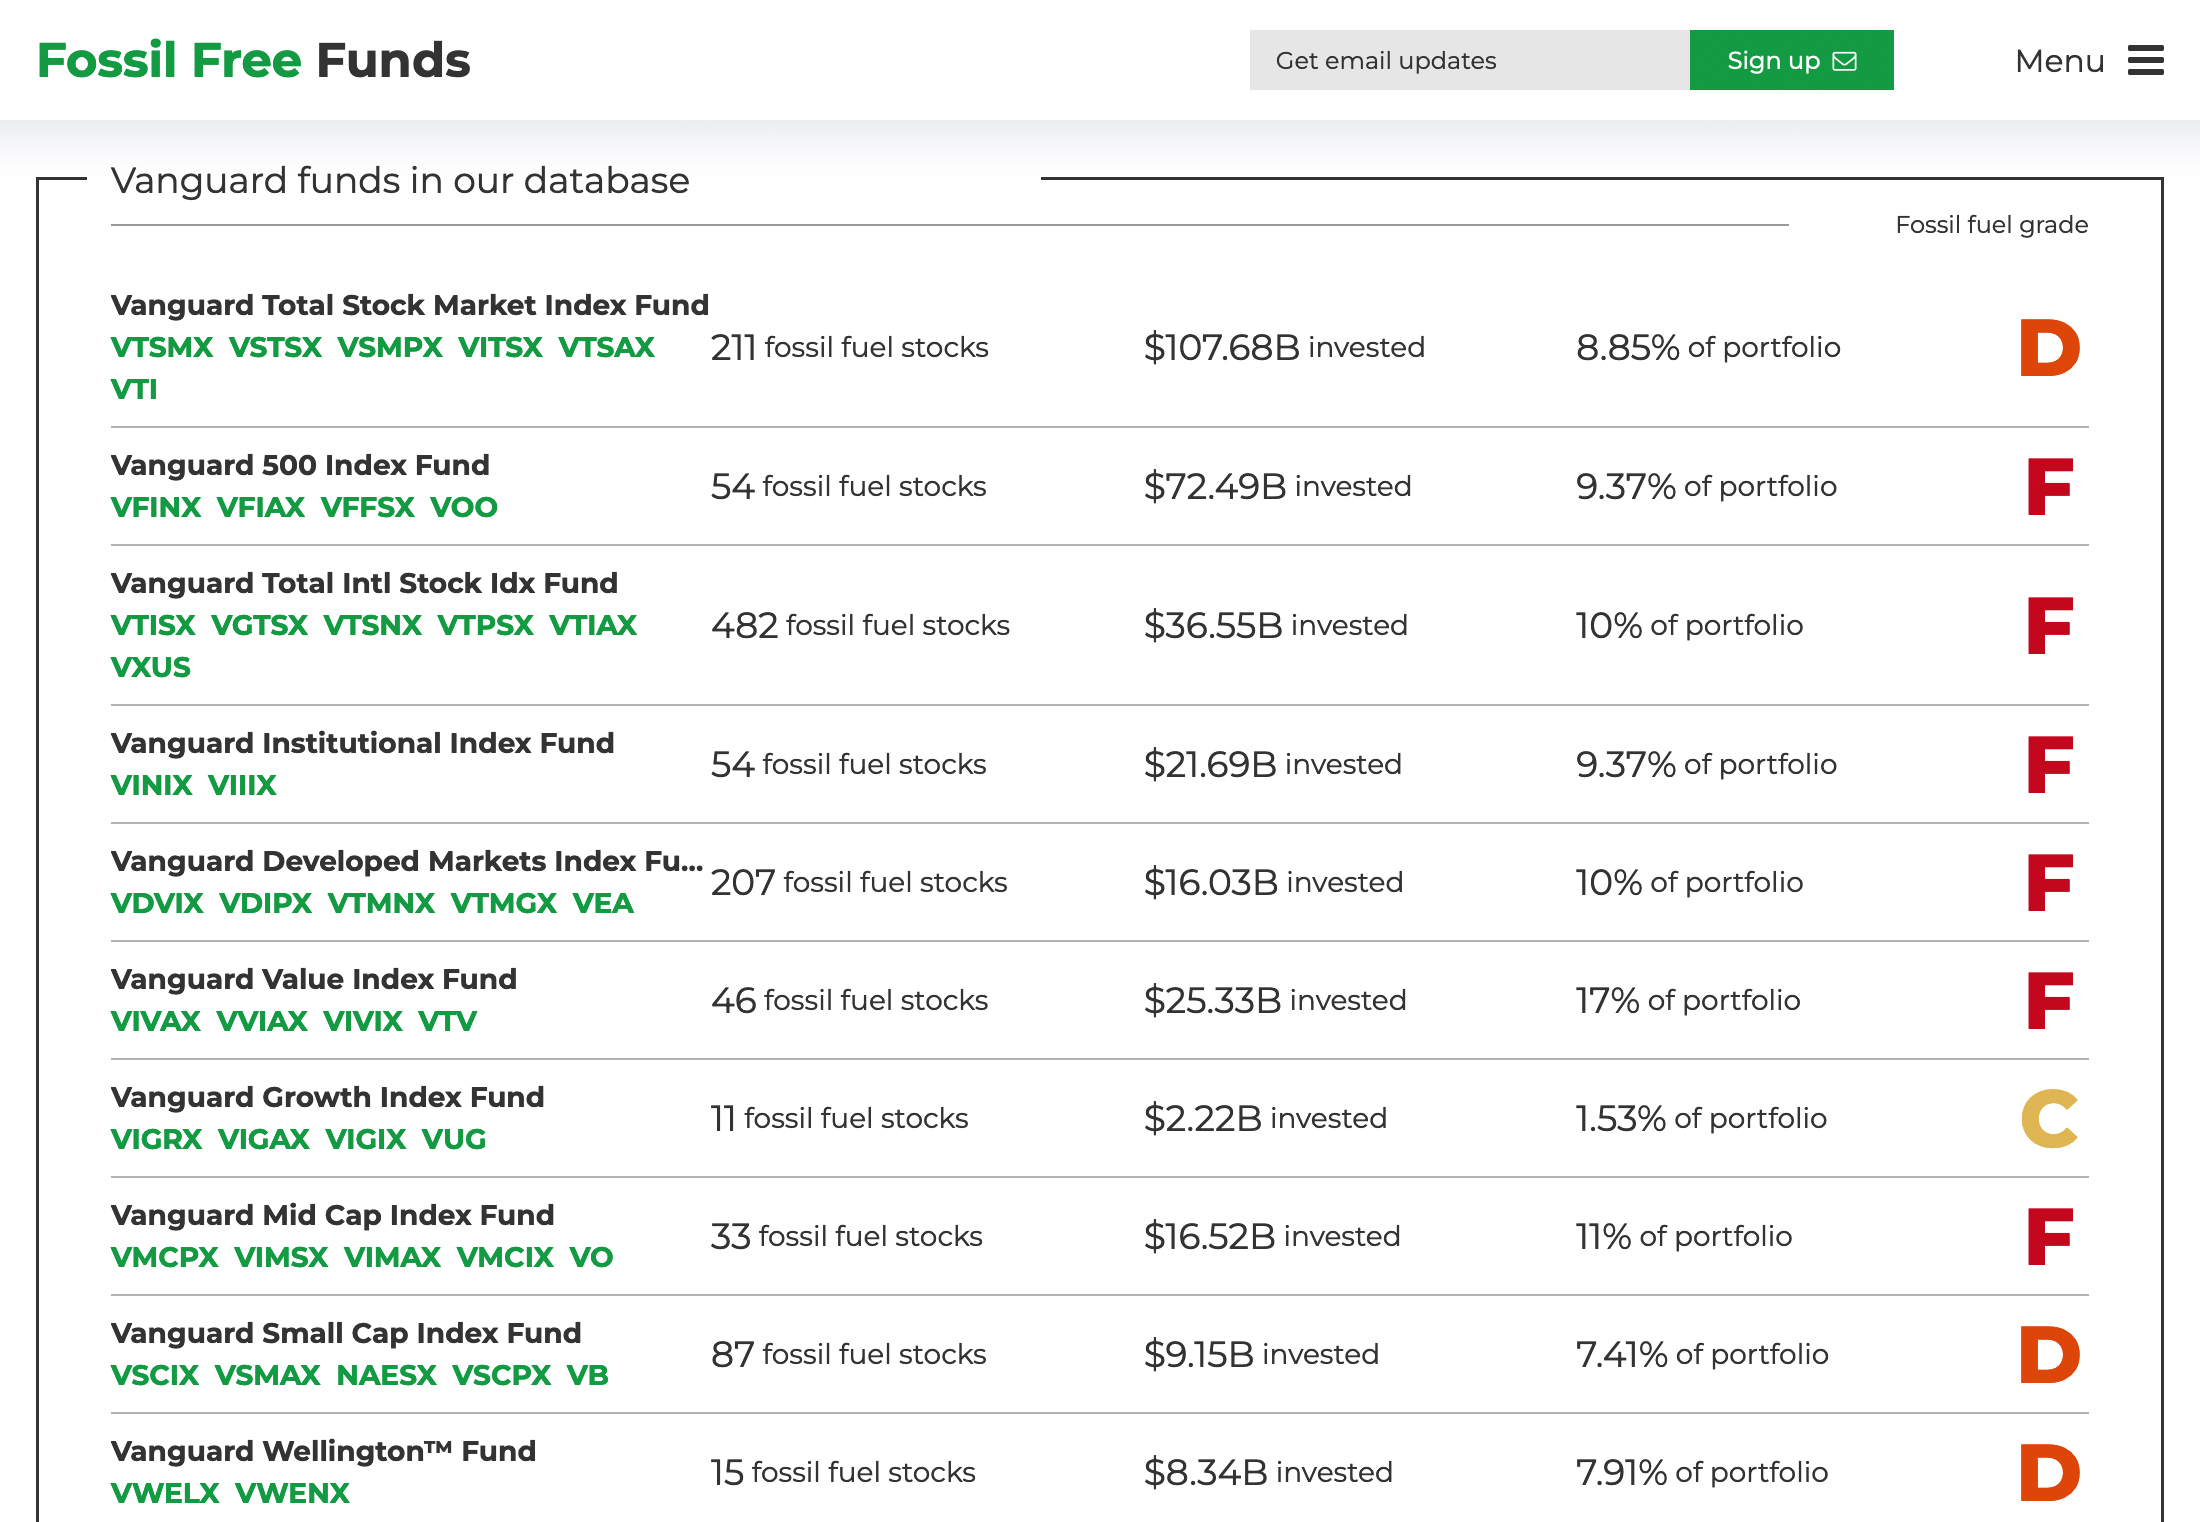 Screenshot from Fossil Free Funds